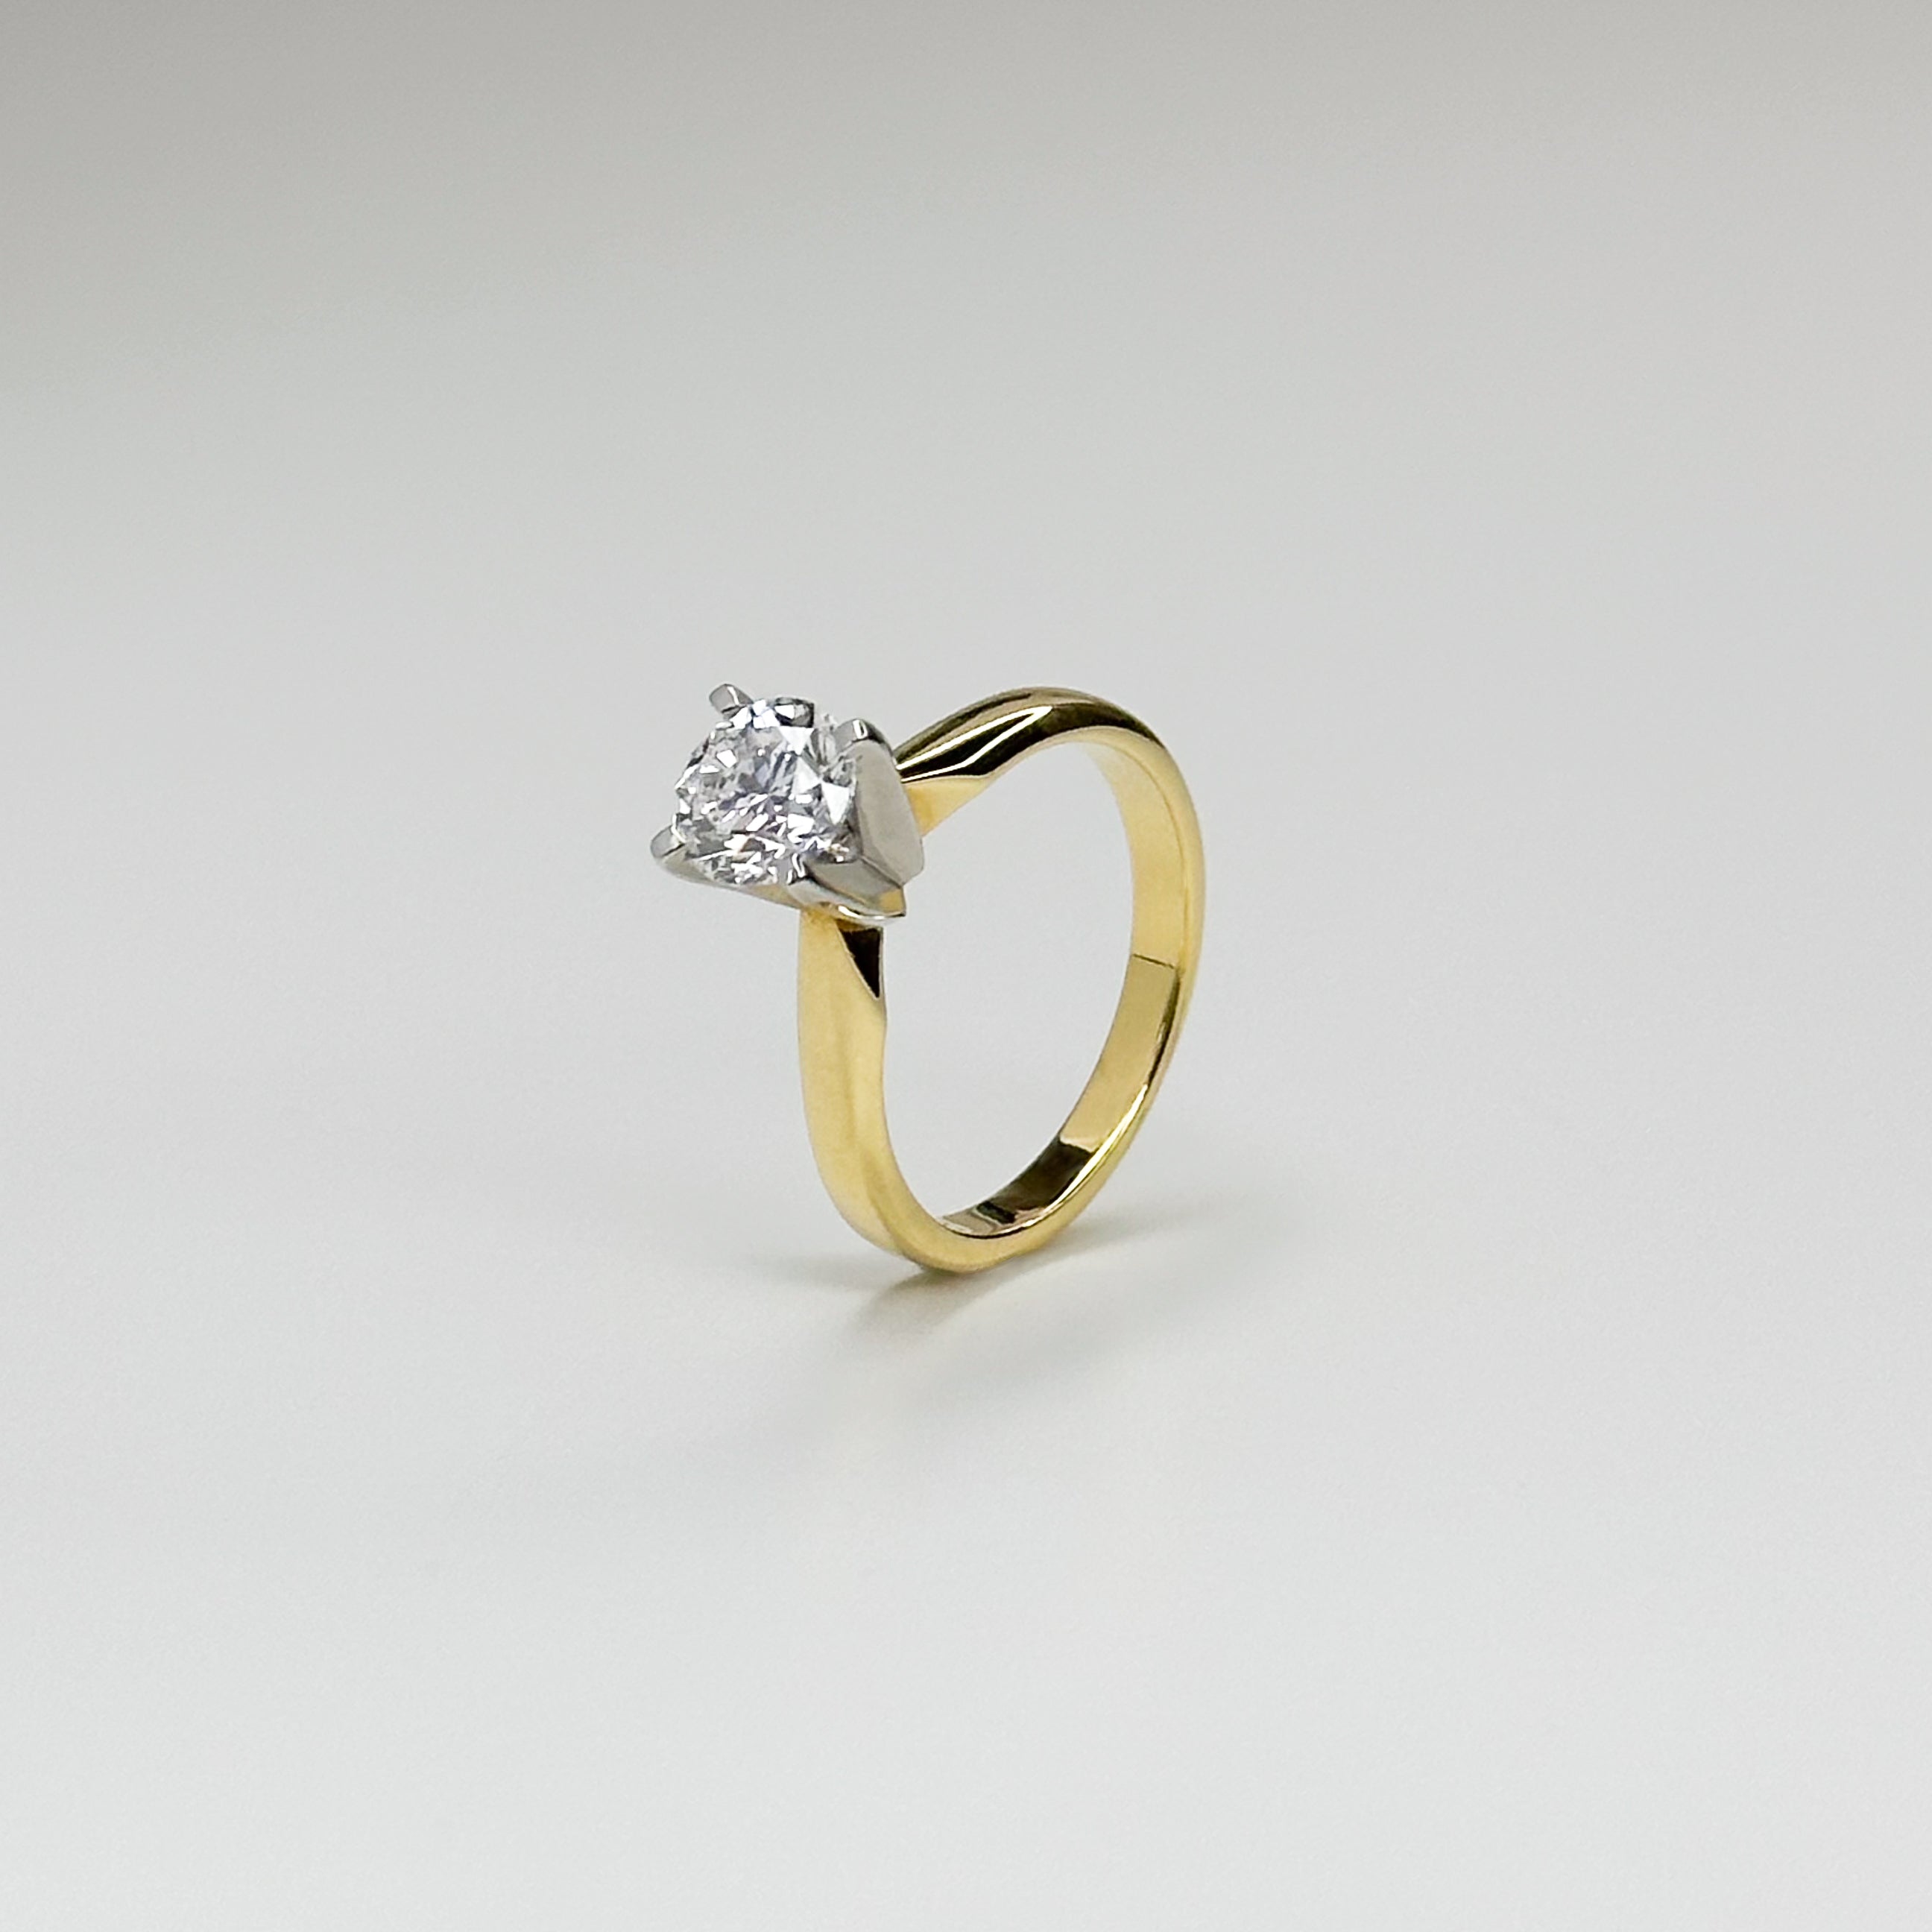 1.00ct Diamond Engagement Ring in Yellow Gold